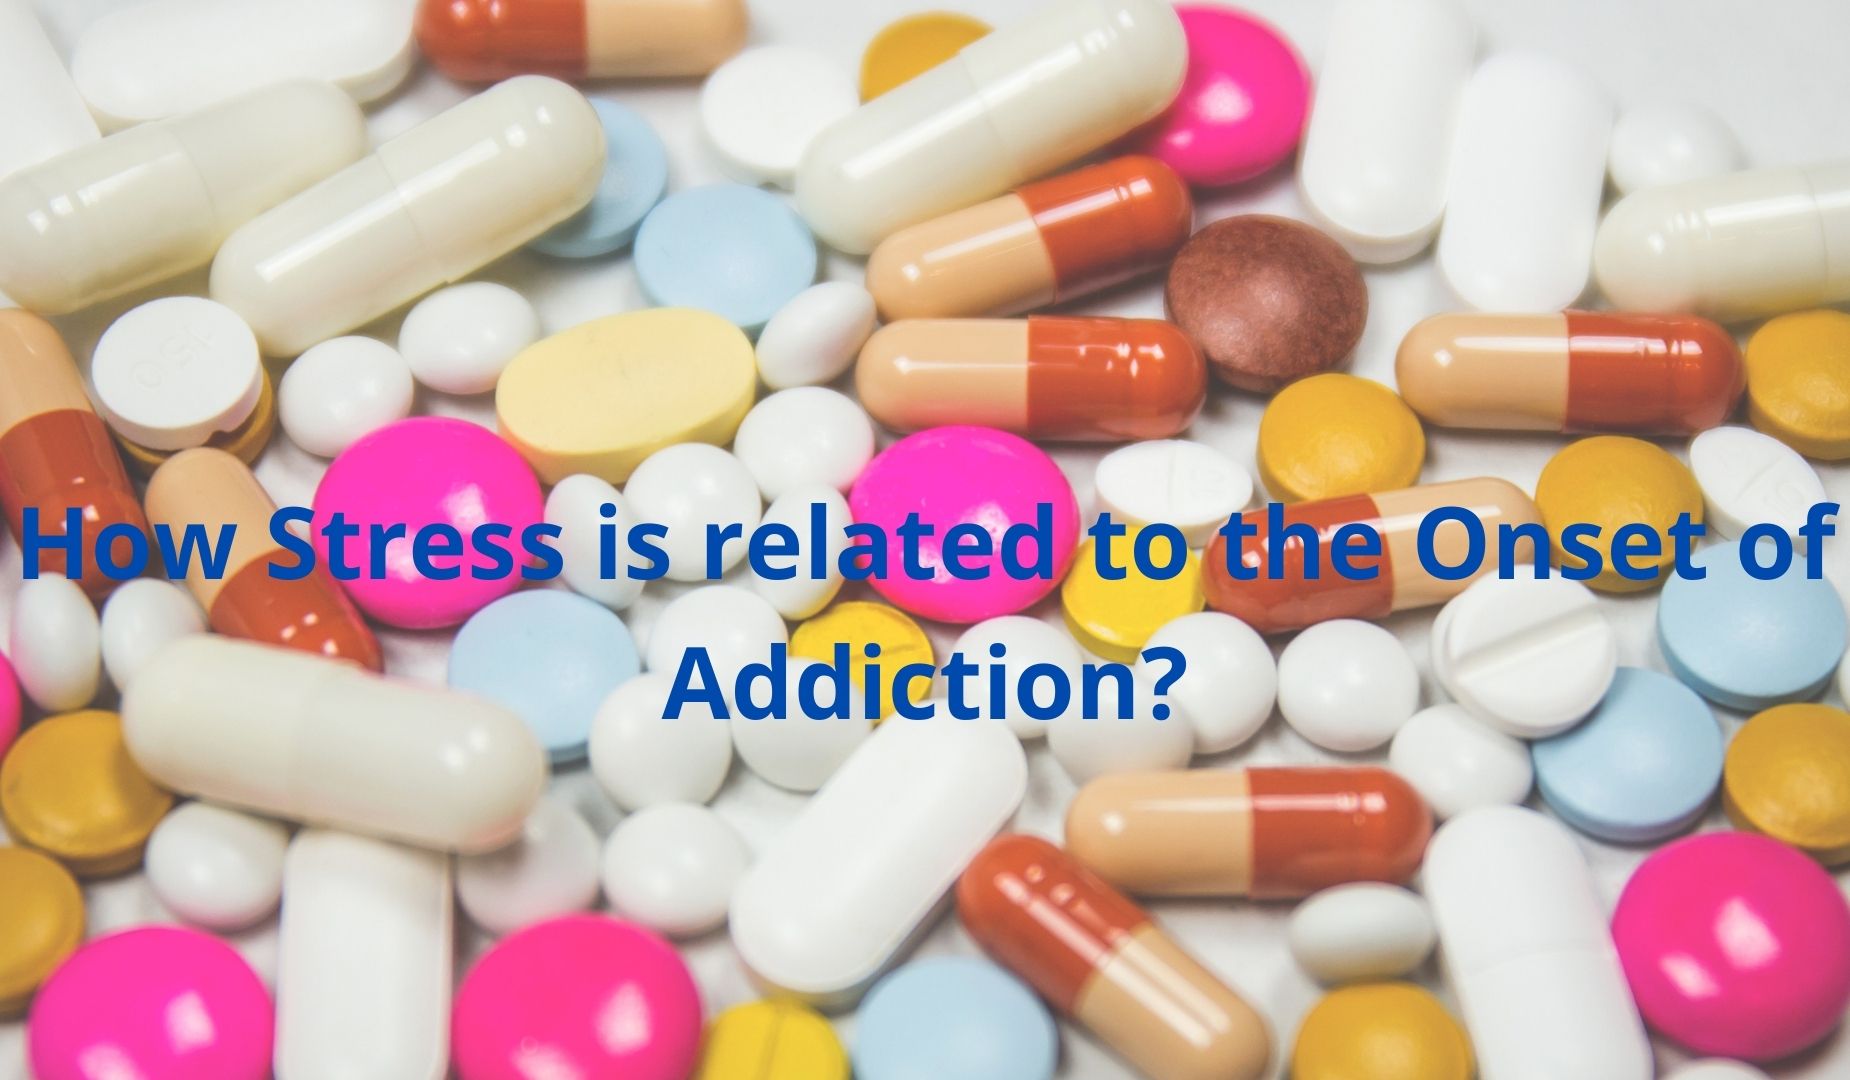 How Stress is related to the Onset of Addiction?